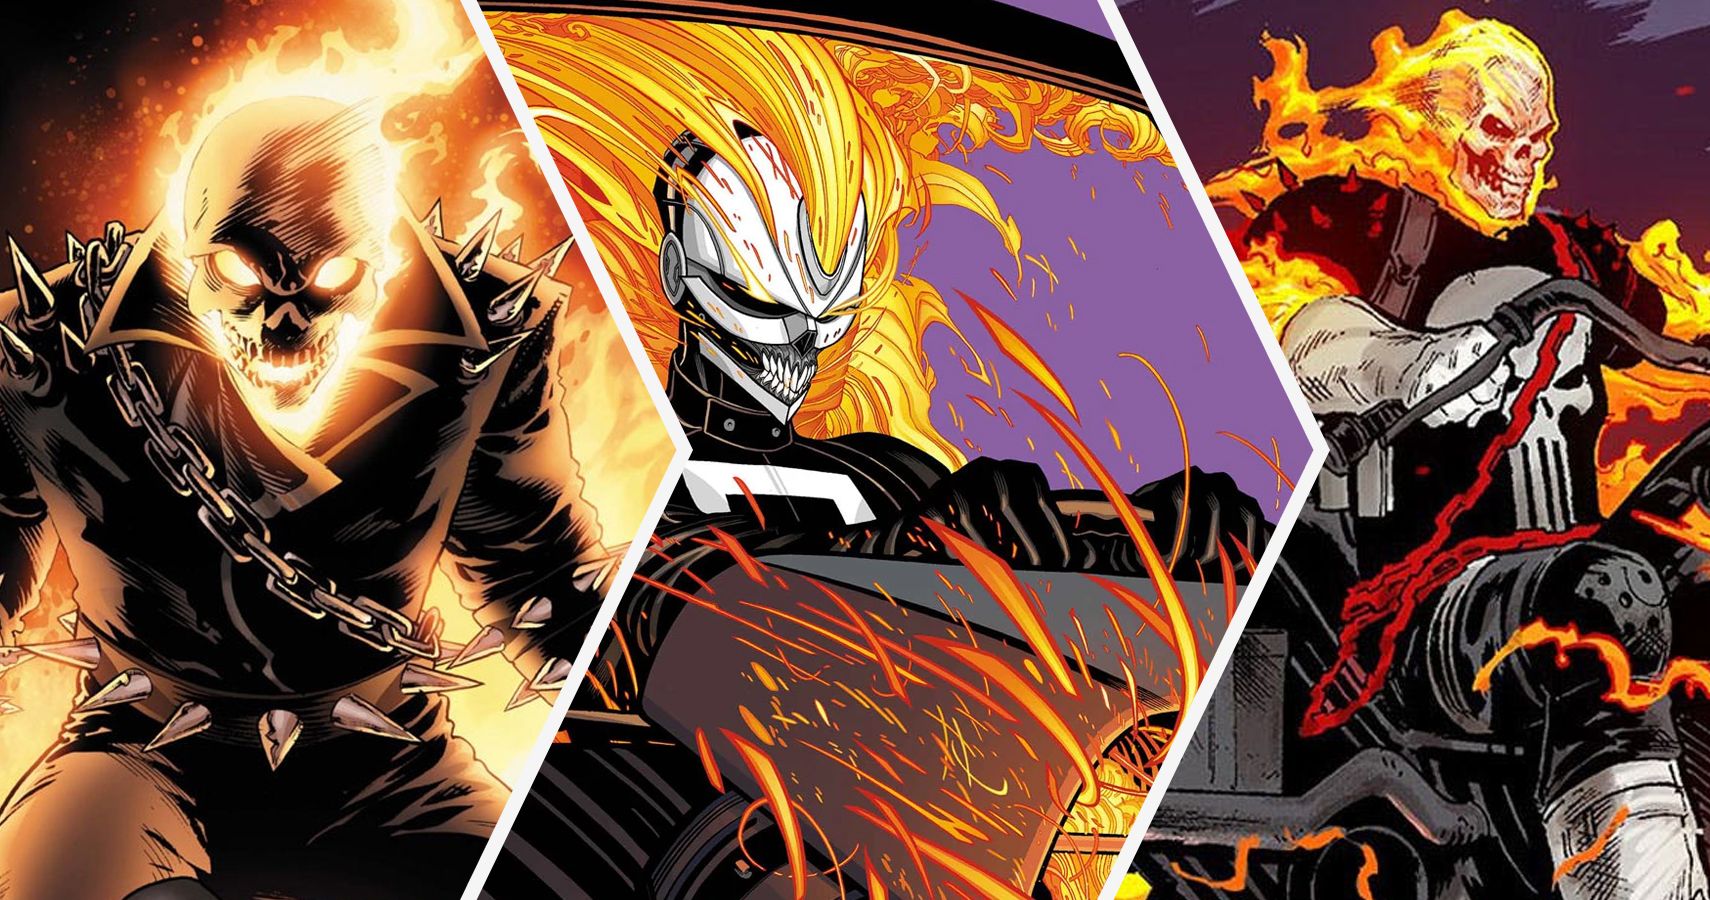 15 Weird Facts About Ghost Rider Only Real Fans Know